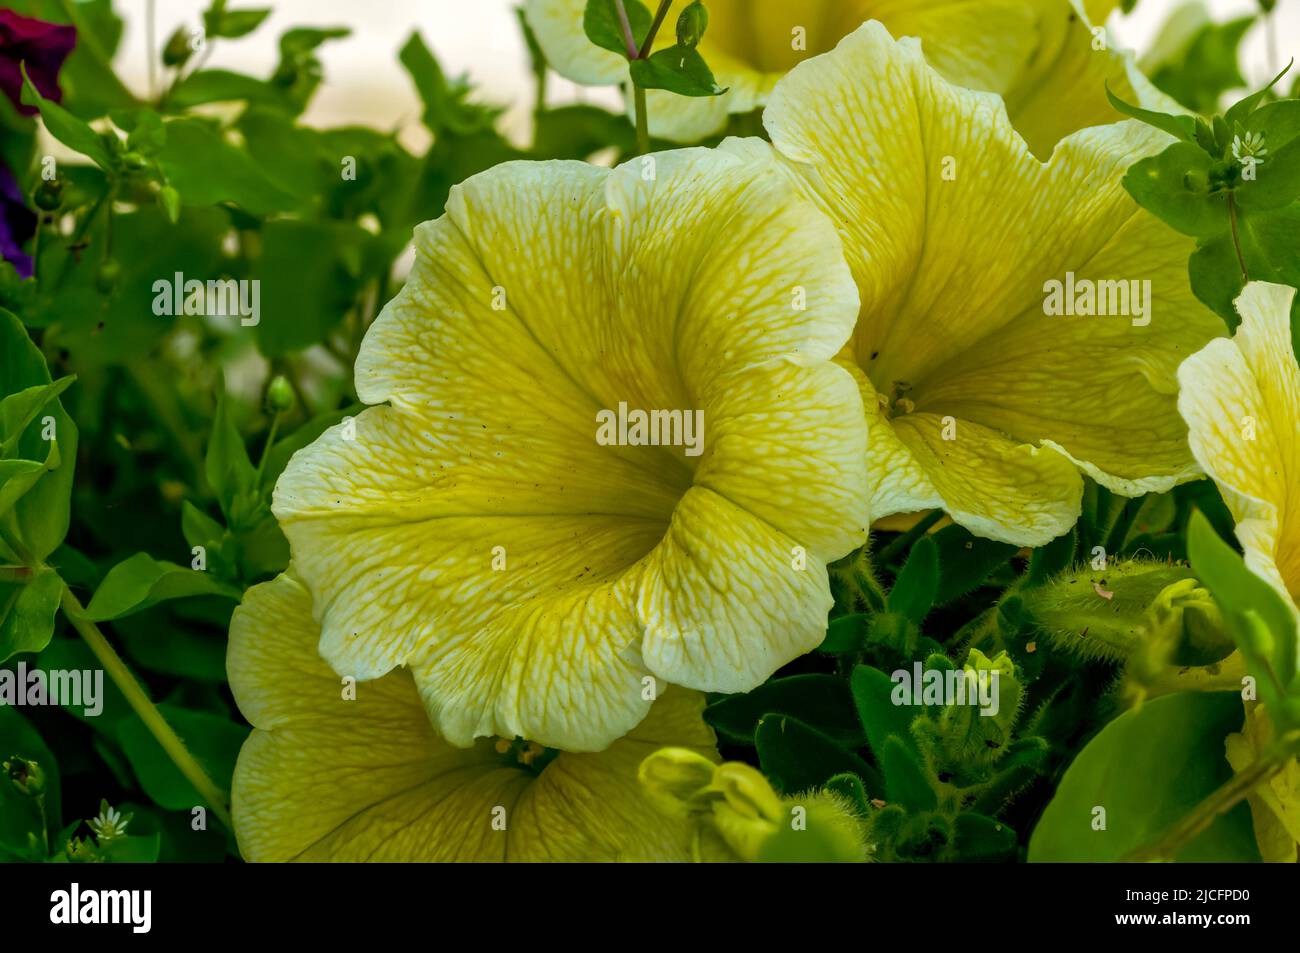 Petunia Juss, multiflorous, flowers in the form of bells, yellow color, at close range Stock Photo